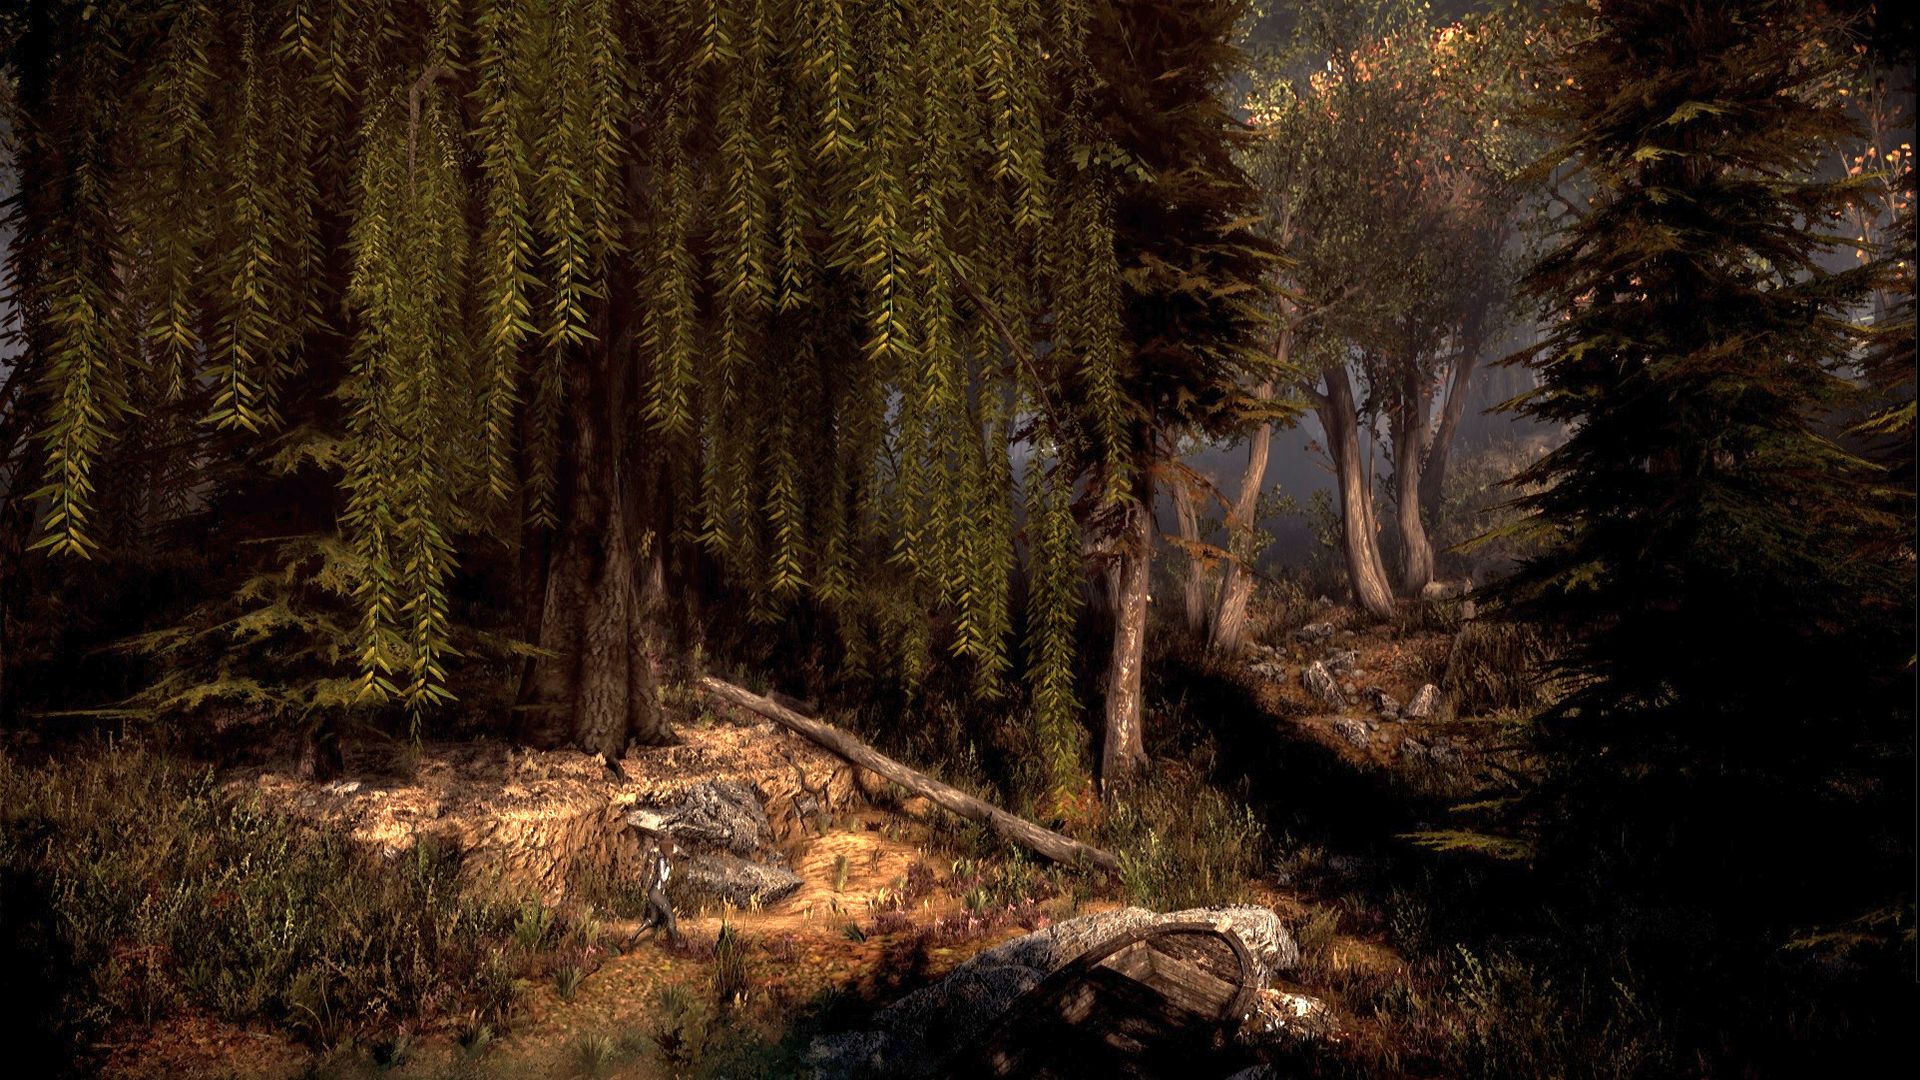 Fallout 76 players are running a music festival to get trees planted in inner cities